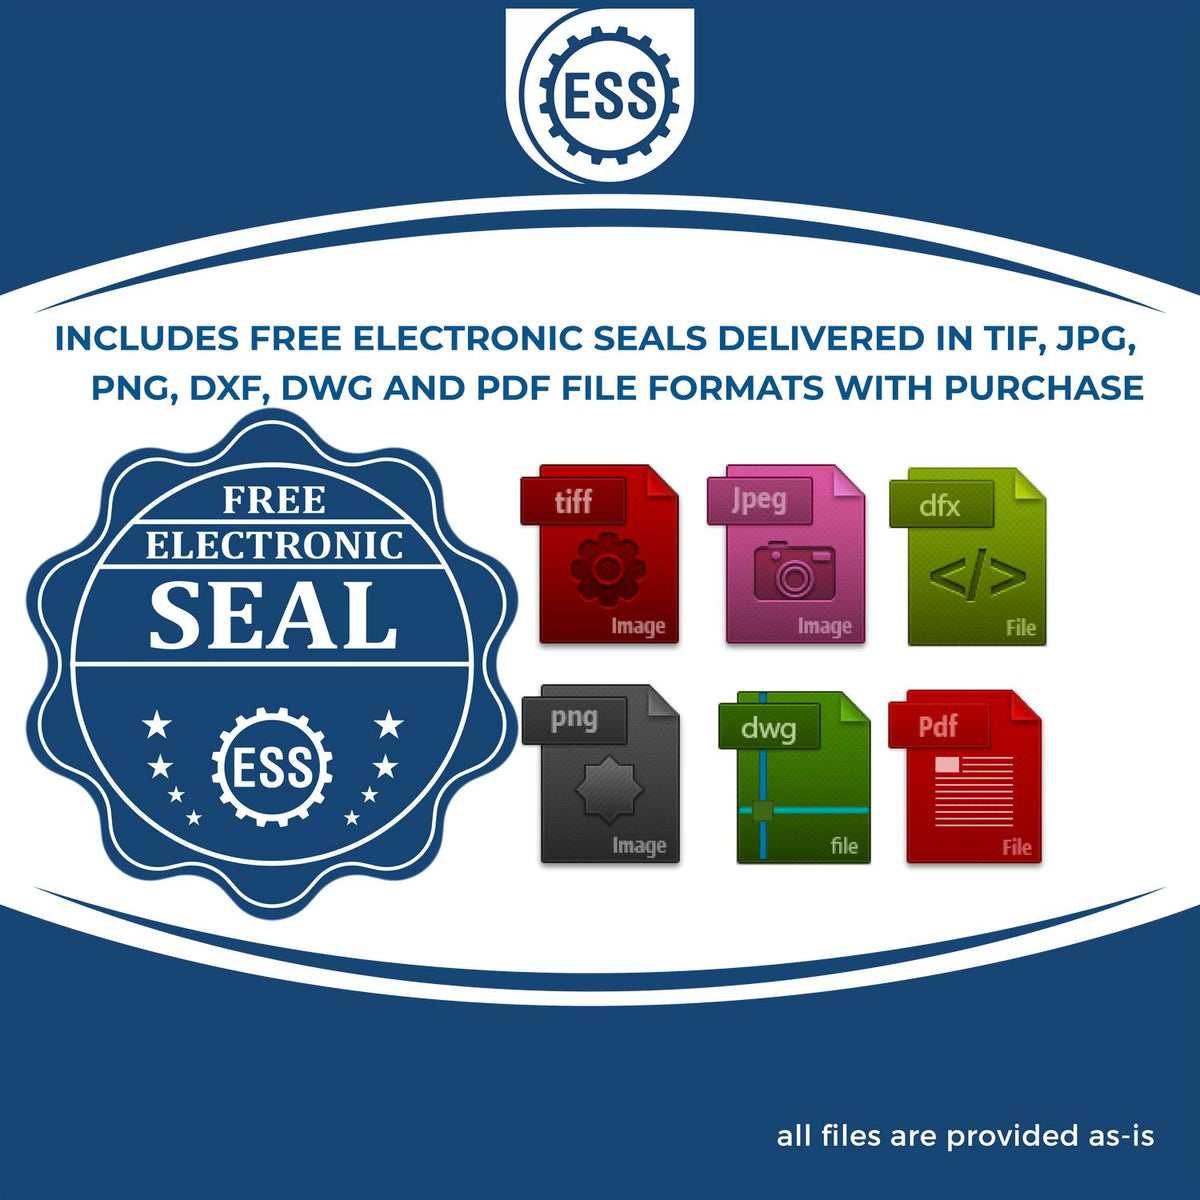 An infographic for the free electronic seal for the Wooden Handle New York State Seal Notary Public Stamp illustrating the different file type icons such as DXF, DWG, TIF, JPG and PNG.